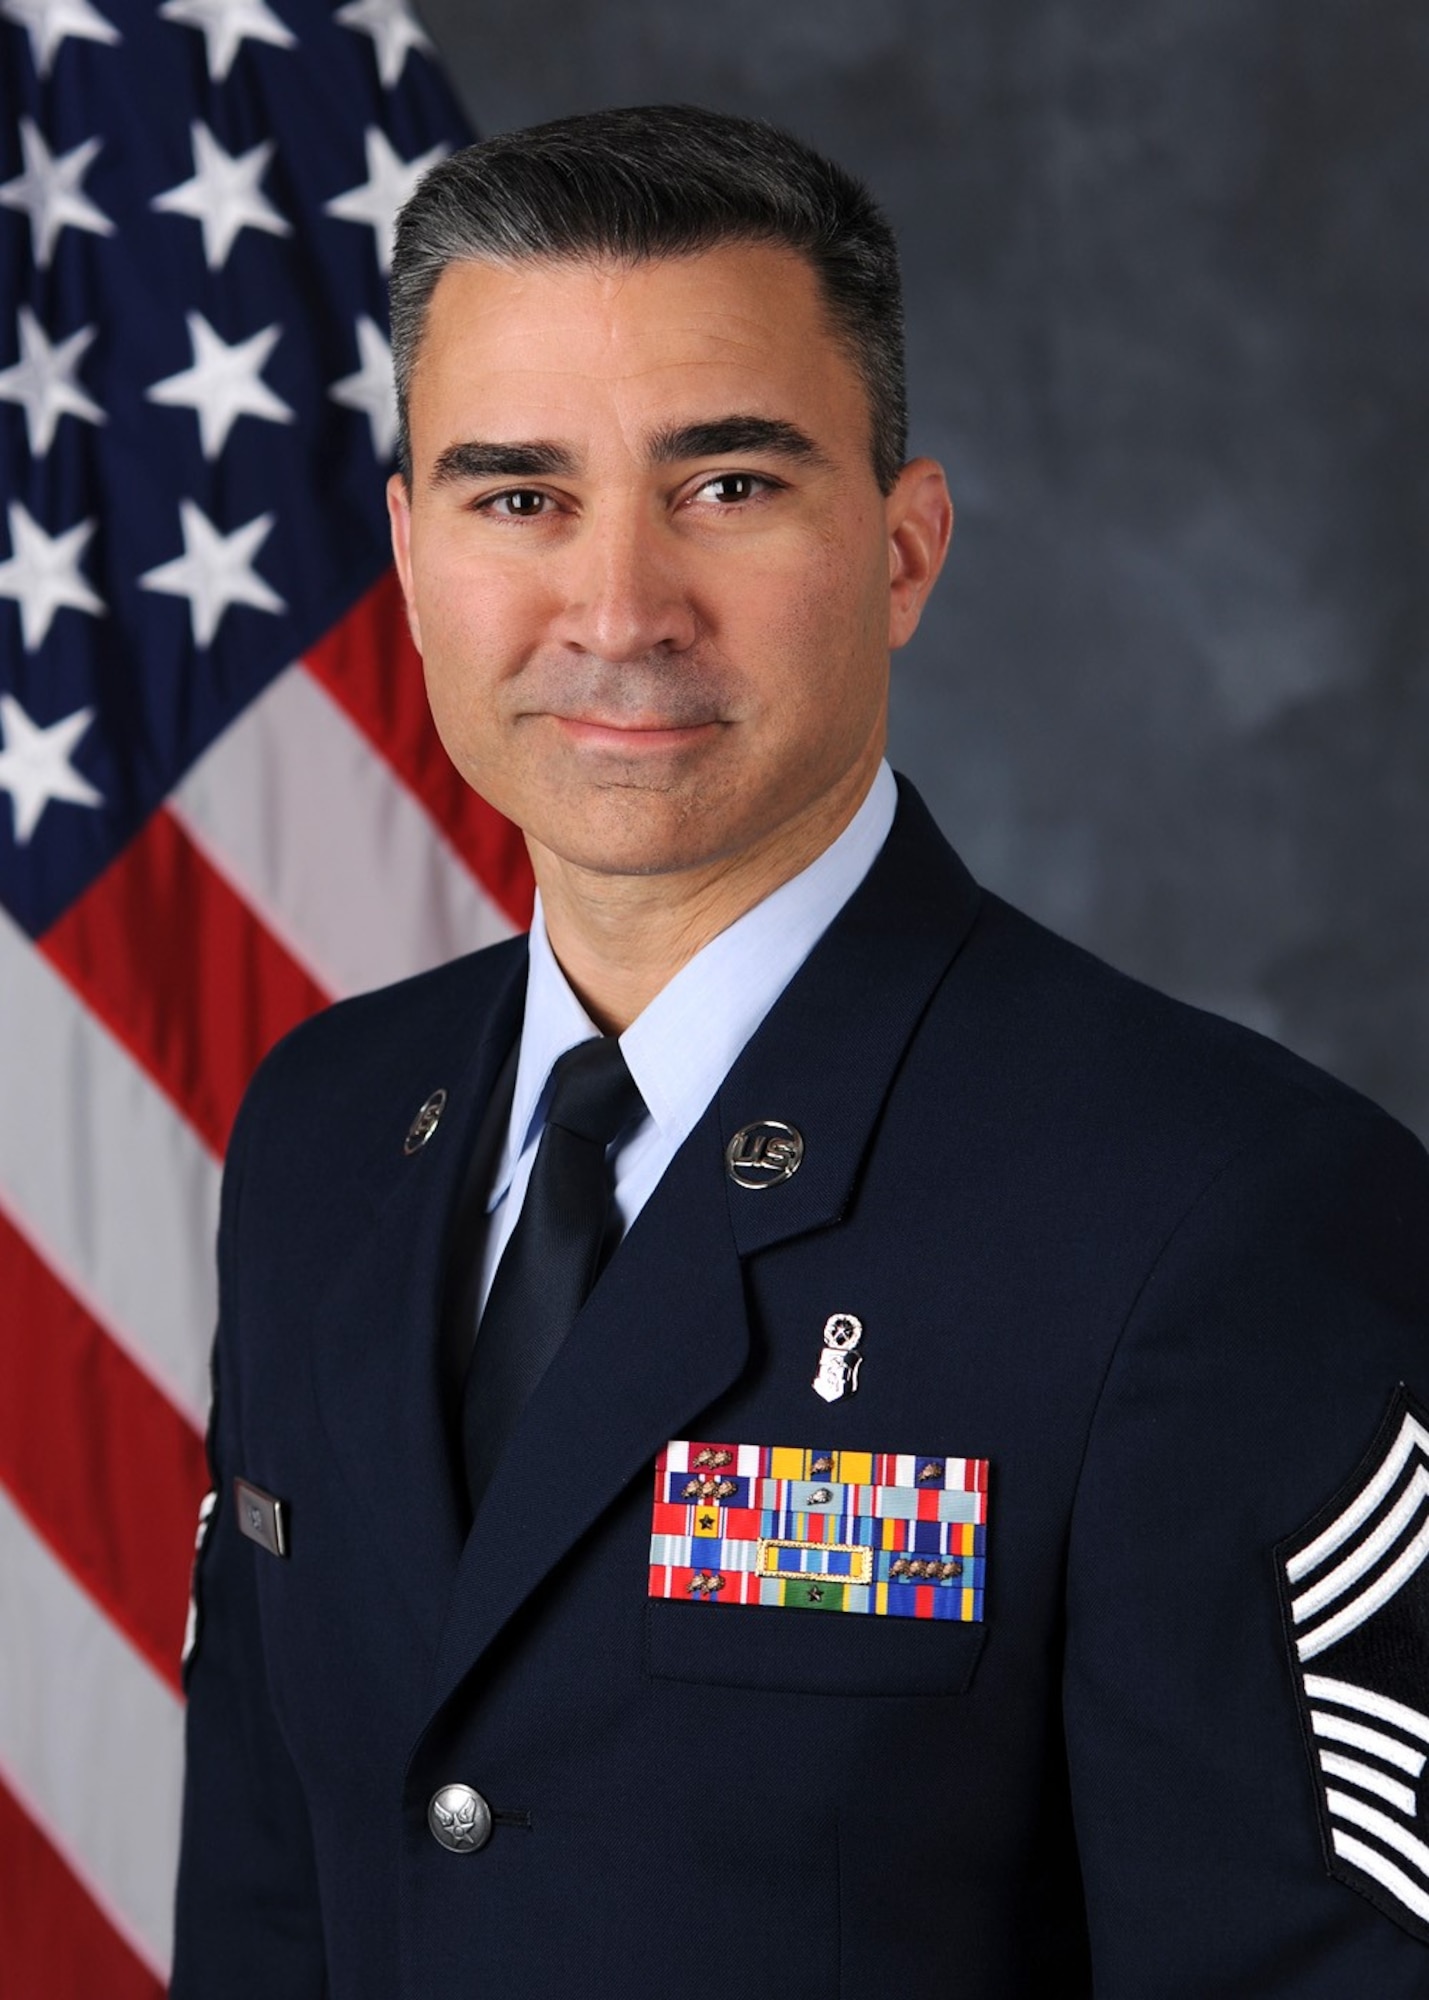 Chief Master Sgt. E. Jason Pace will assume the new position this spring as the 7th Chief, Medical Enlisted Force, and Enlisted Corps Chief and will act as the lead senior enlisted advisor for the Air Force Medical Service. (Courtesy Photo)